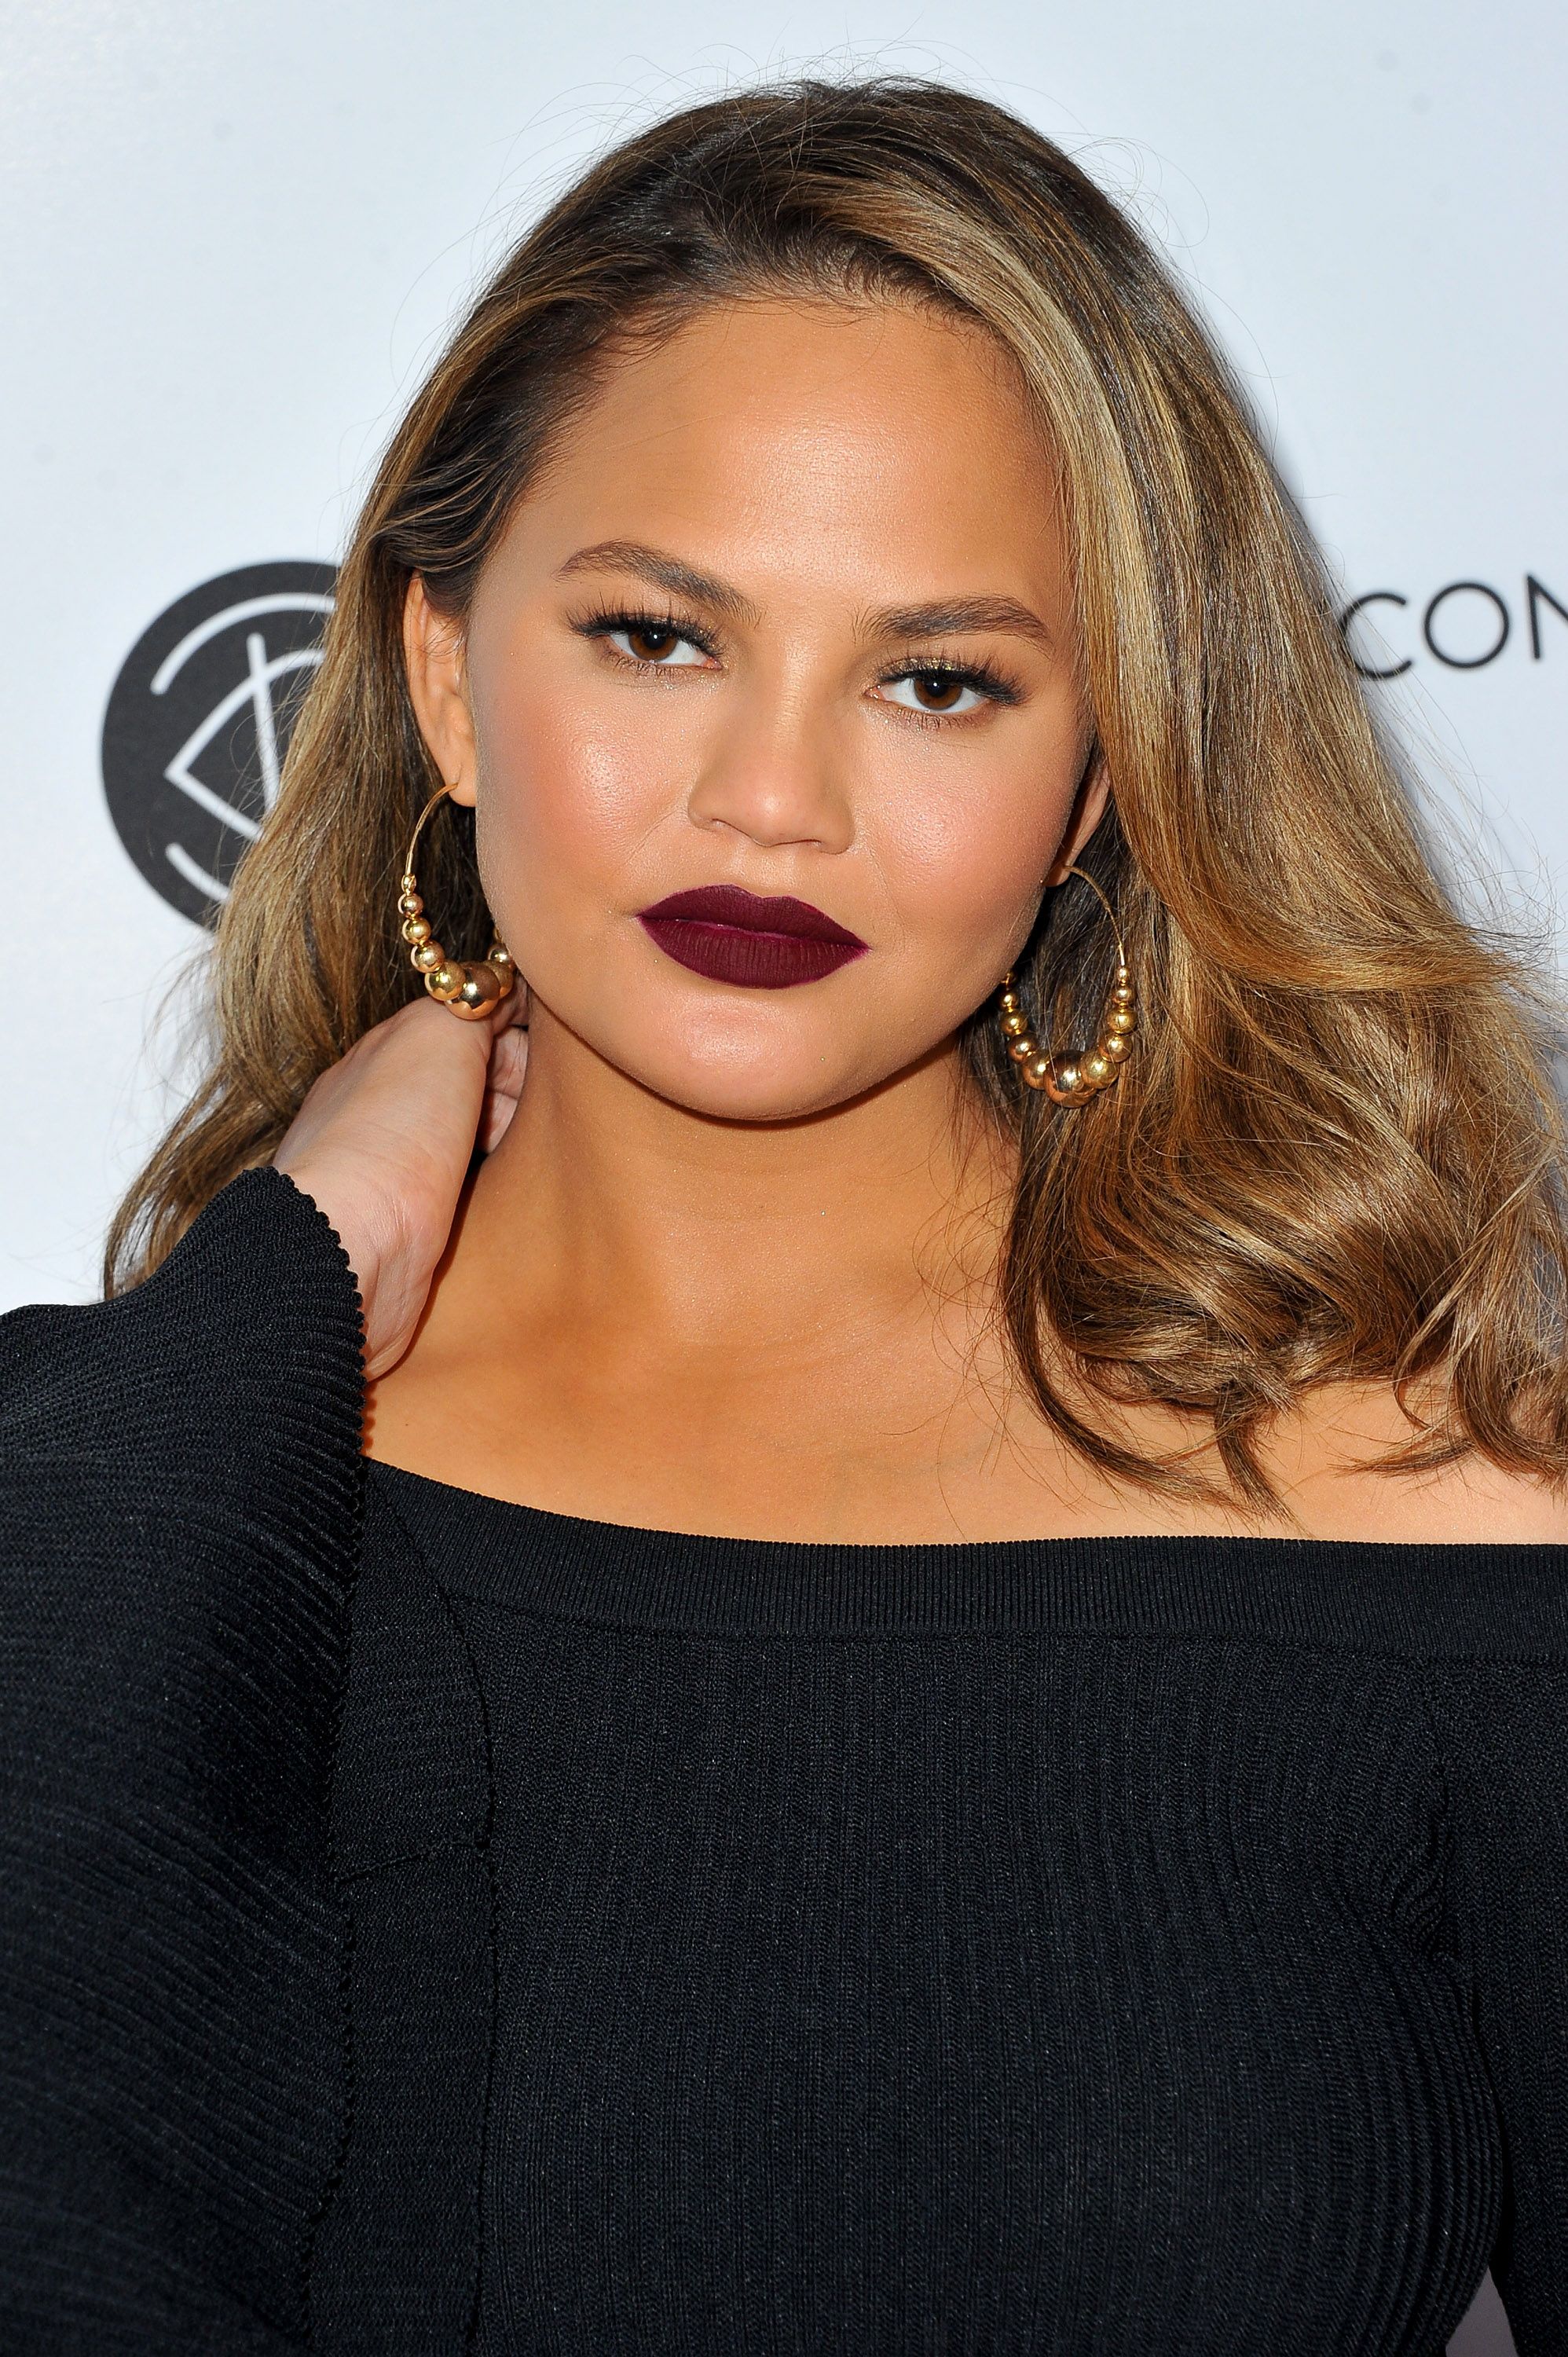 Model Chrissy Teigen at the 5th Annual Beautycon Festival Los Angeles in Los Angeles, California | Photo: Allen Berezovsky/Getty Images for Fashion Media